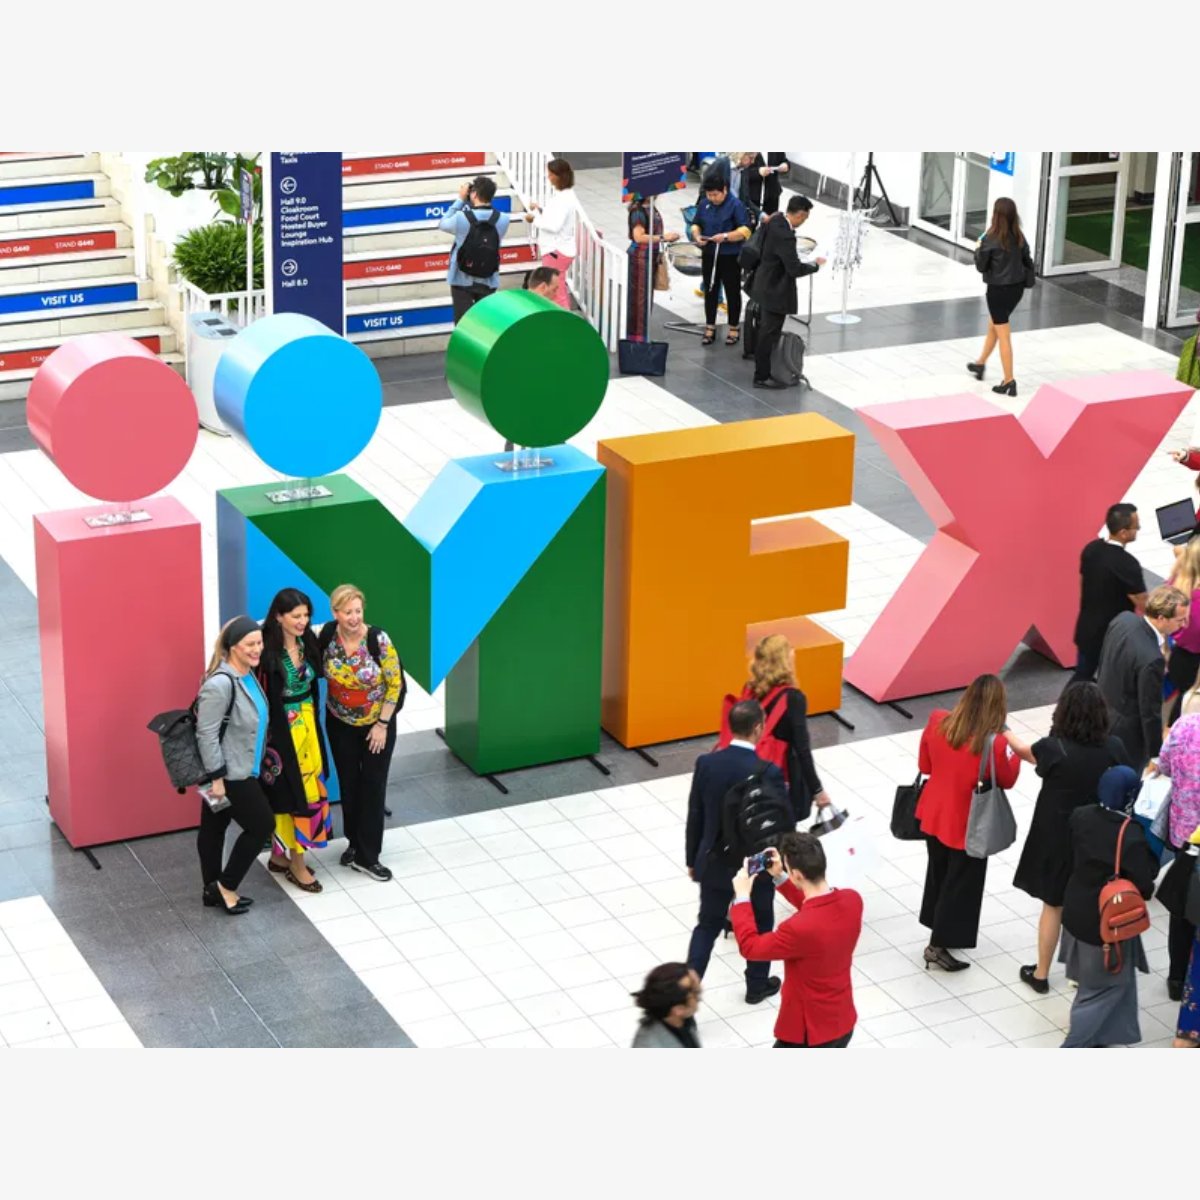 @IMEX_Group Frankfurt is less than two weeks away! Looks like it’s going to be a big one: bit.ly/44rhpHW! Will we see you there? 👋
#IMEXFrankfurt #EventProfs #LetsThrive